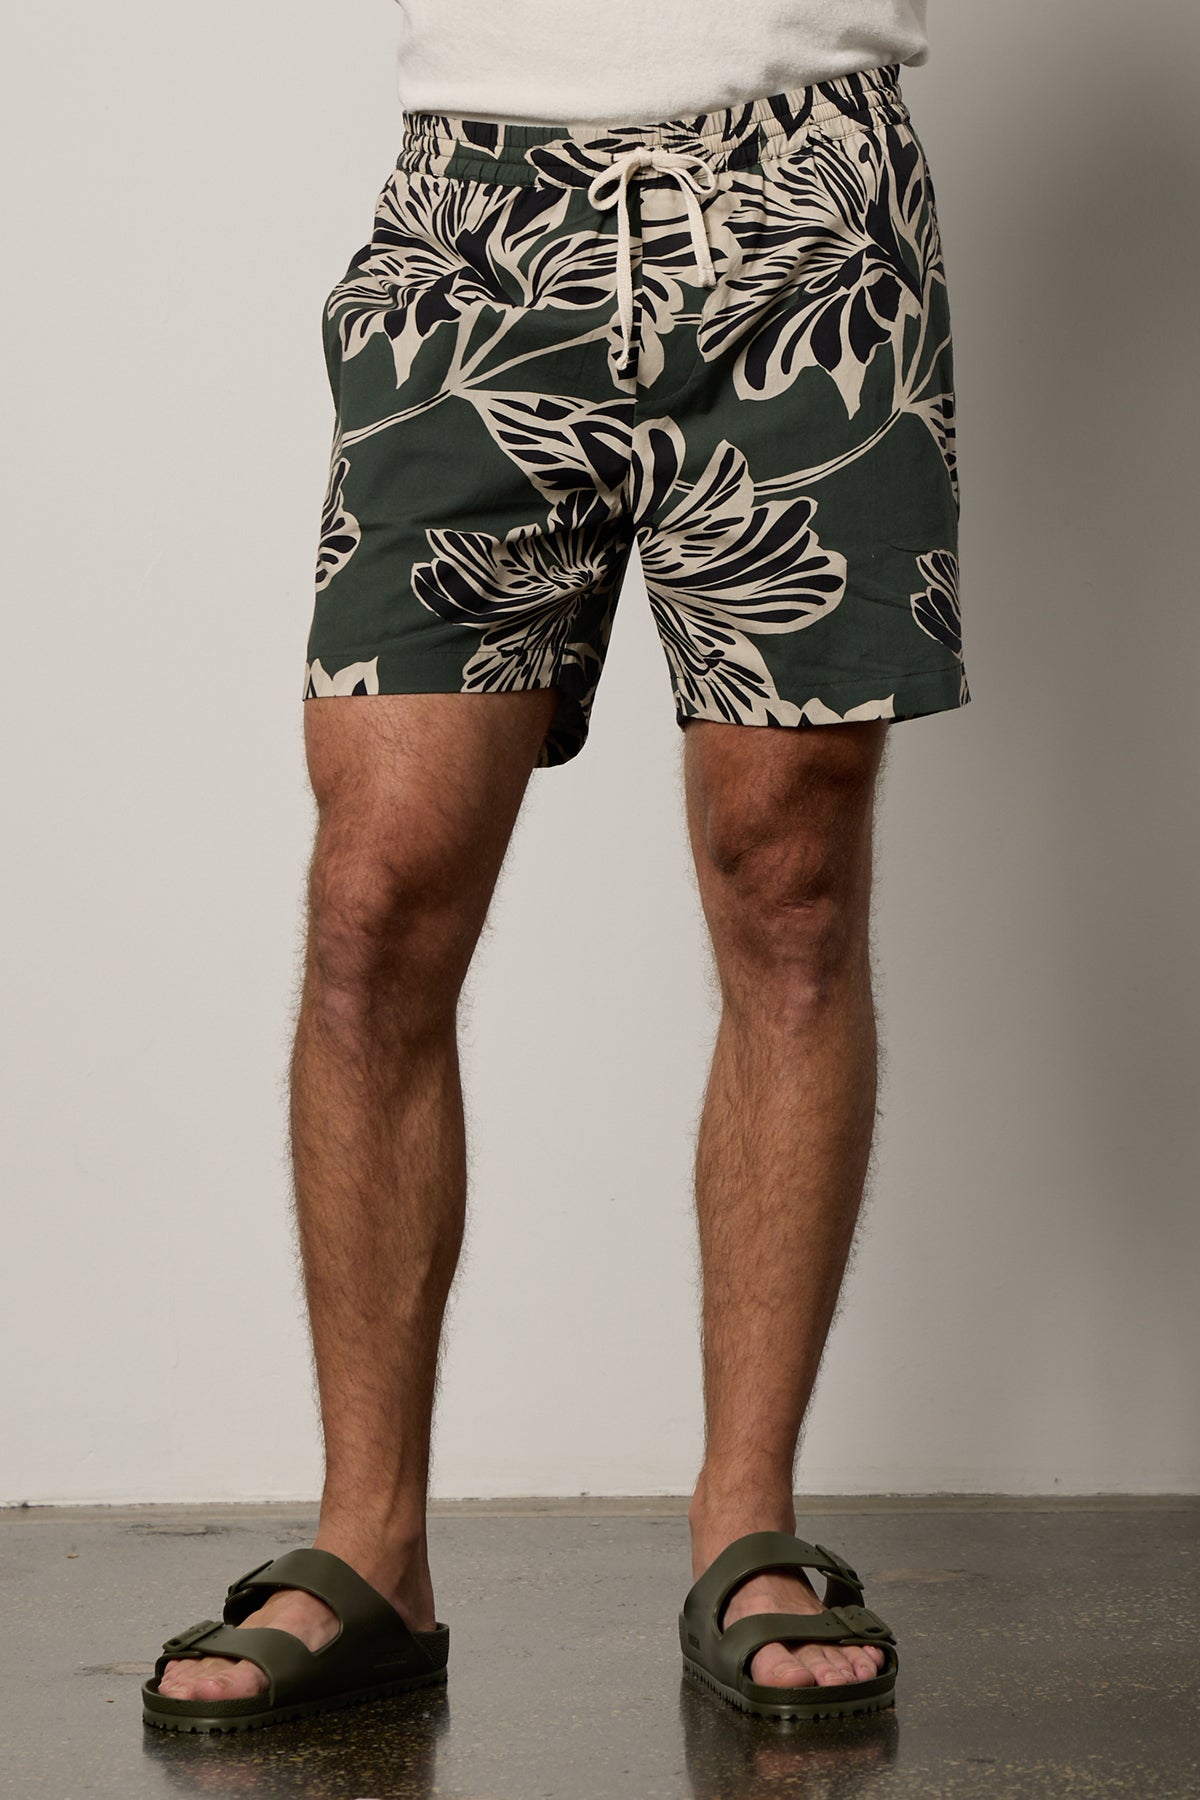   Colt Short front in catalina print with bold, black and cream pattern on dark green background  